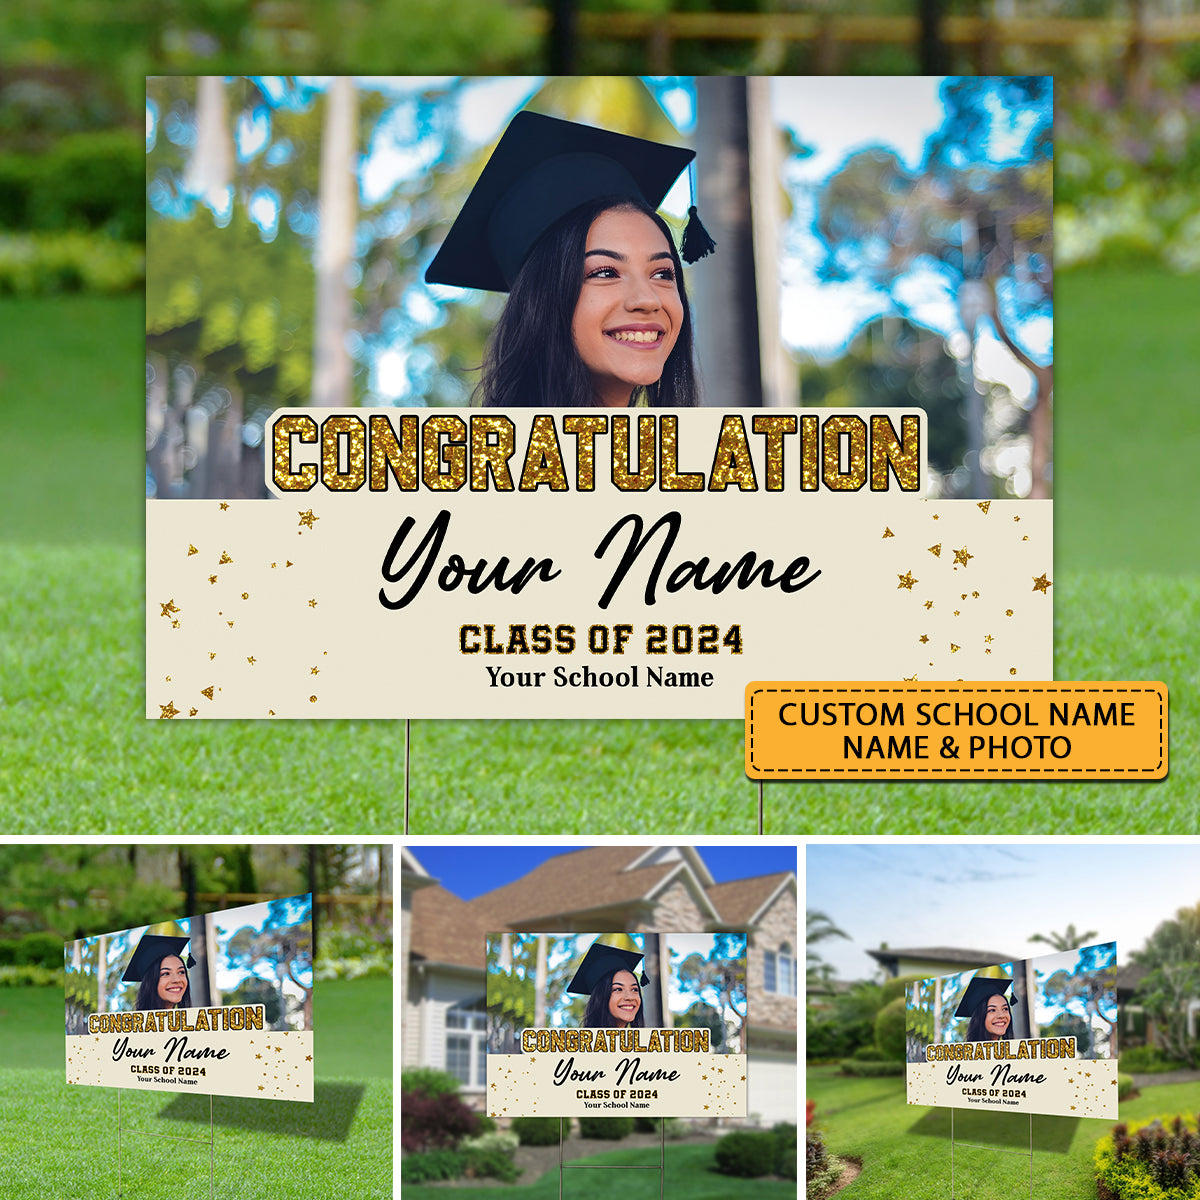 Congratulation Class Of 2024, Custom School Name, Your Name And Photo, Personalized Lawn Sign, Yard Sign, Gift For Graduation